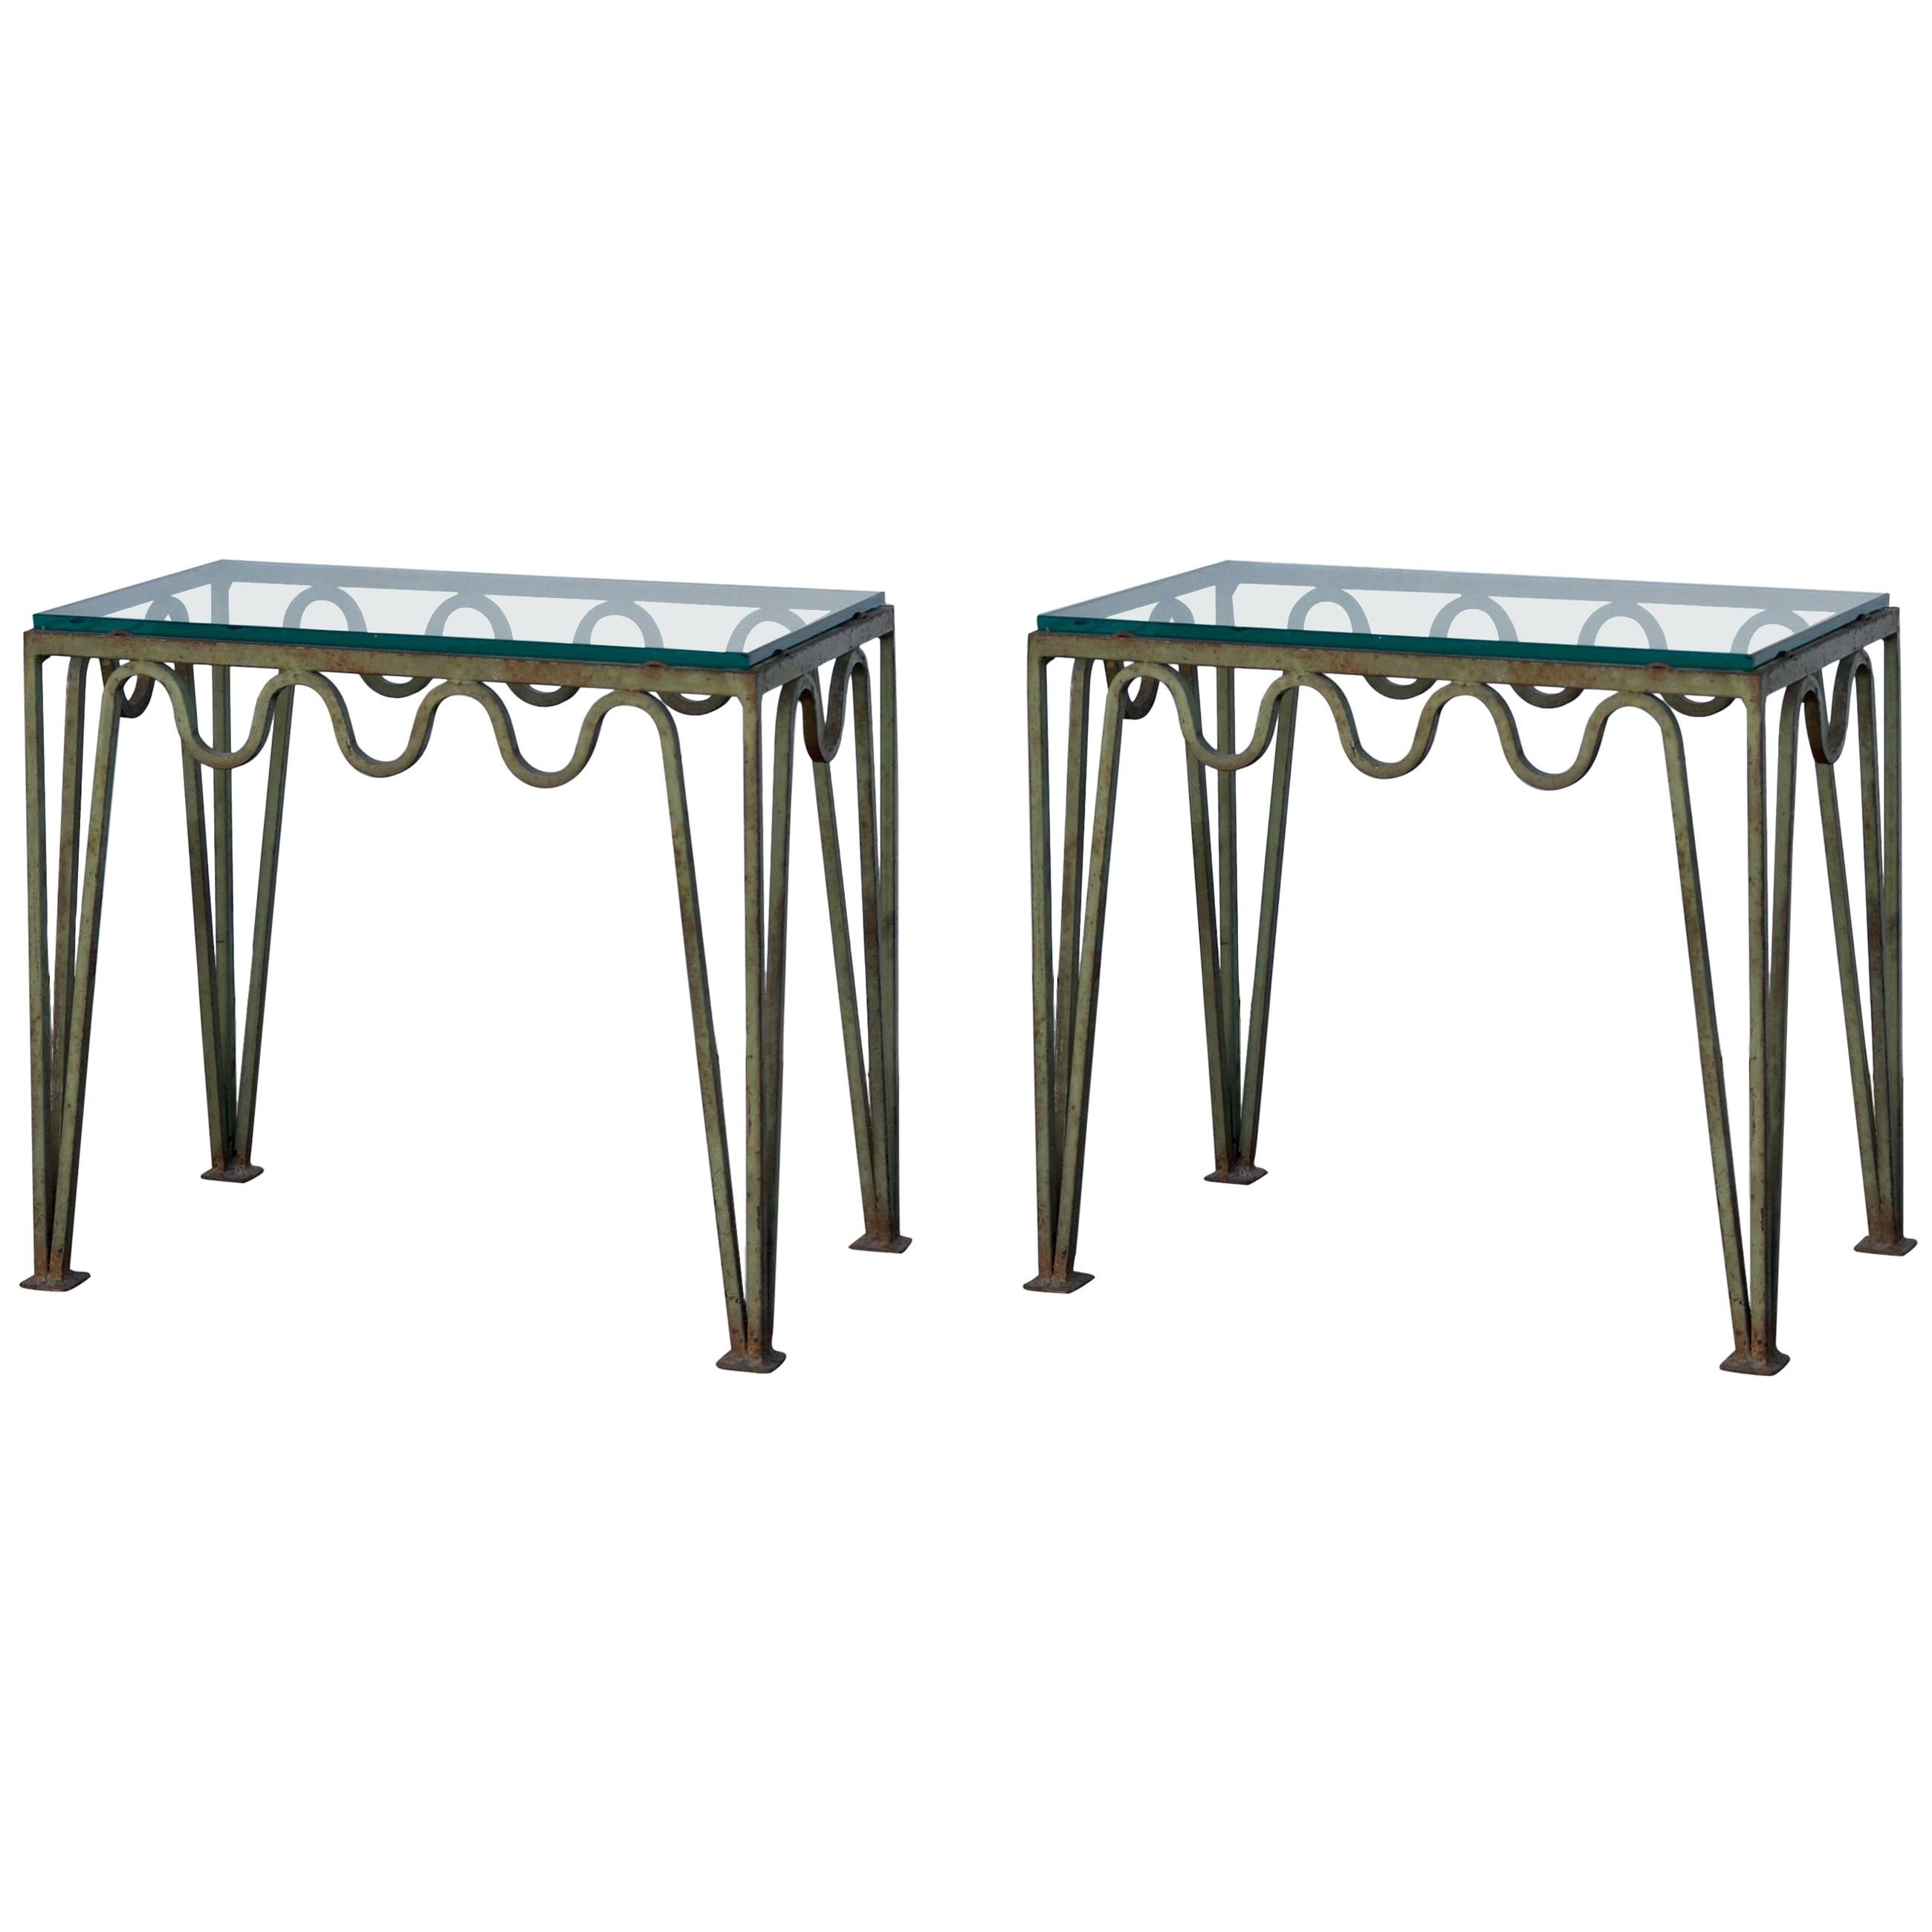 Pair of 'Méandre' Verdigris and Glass Side Tables by Design Frères